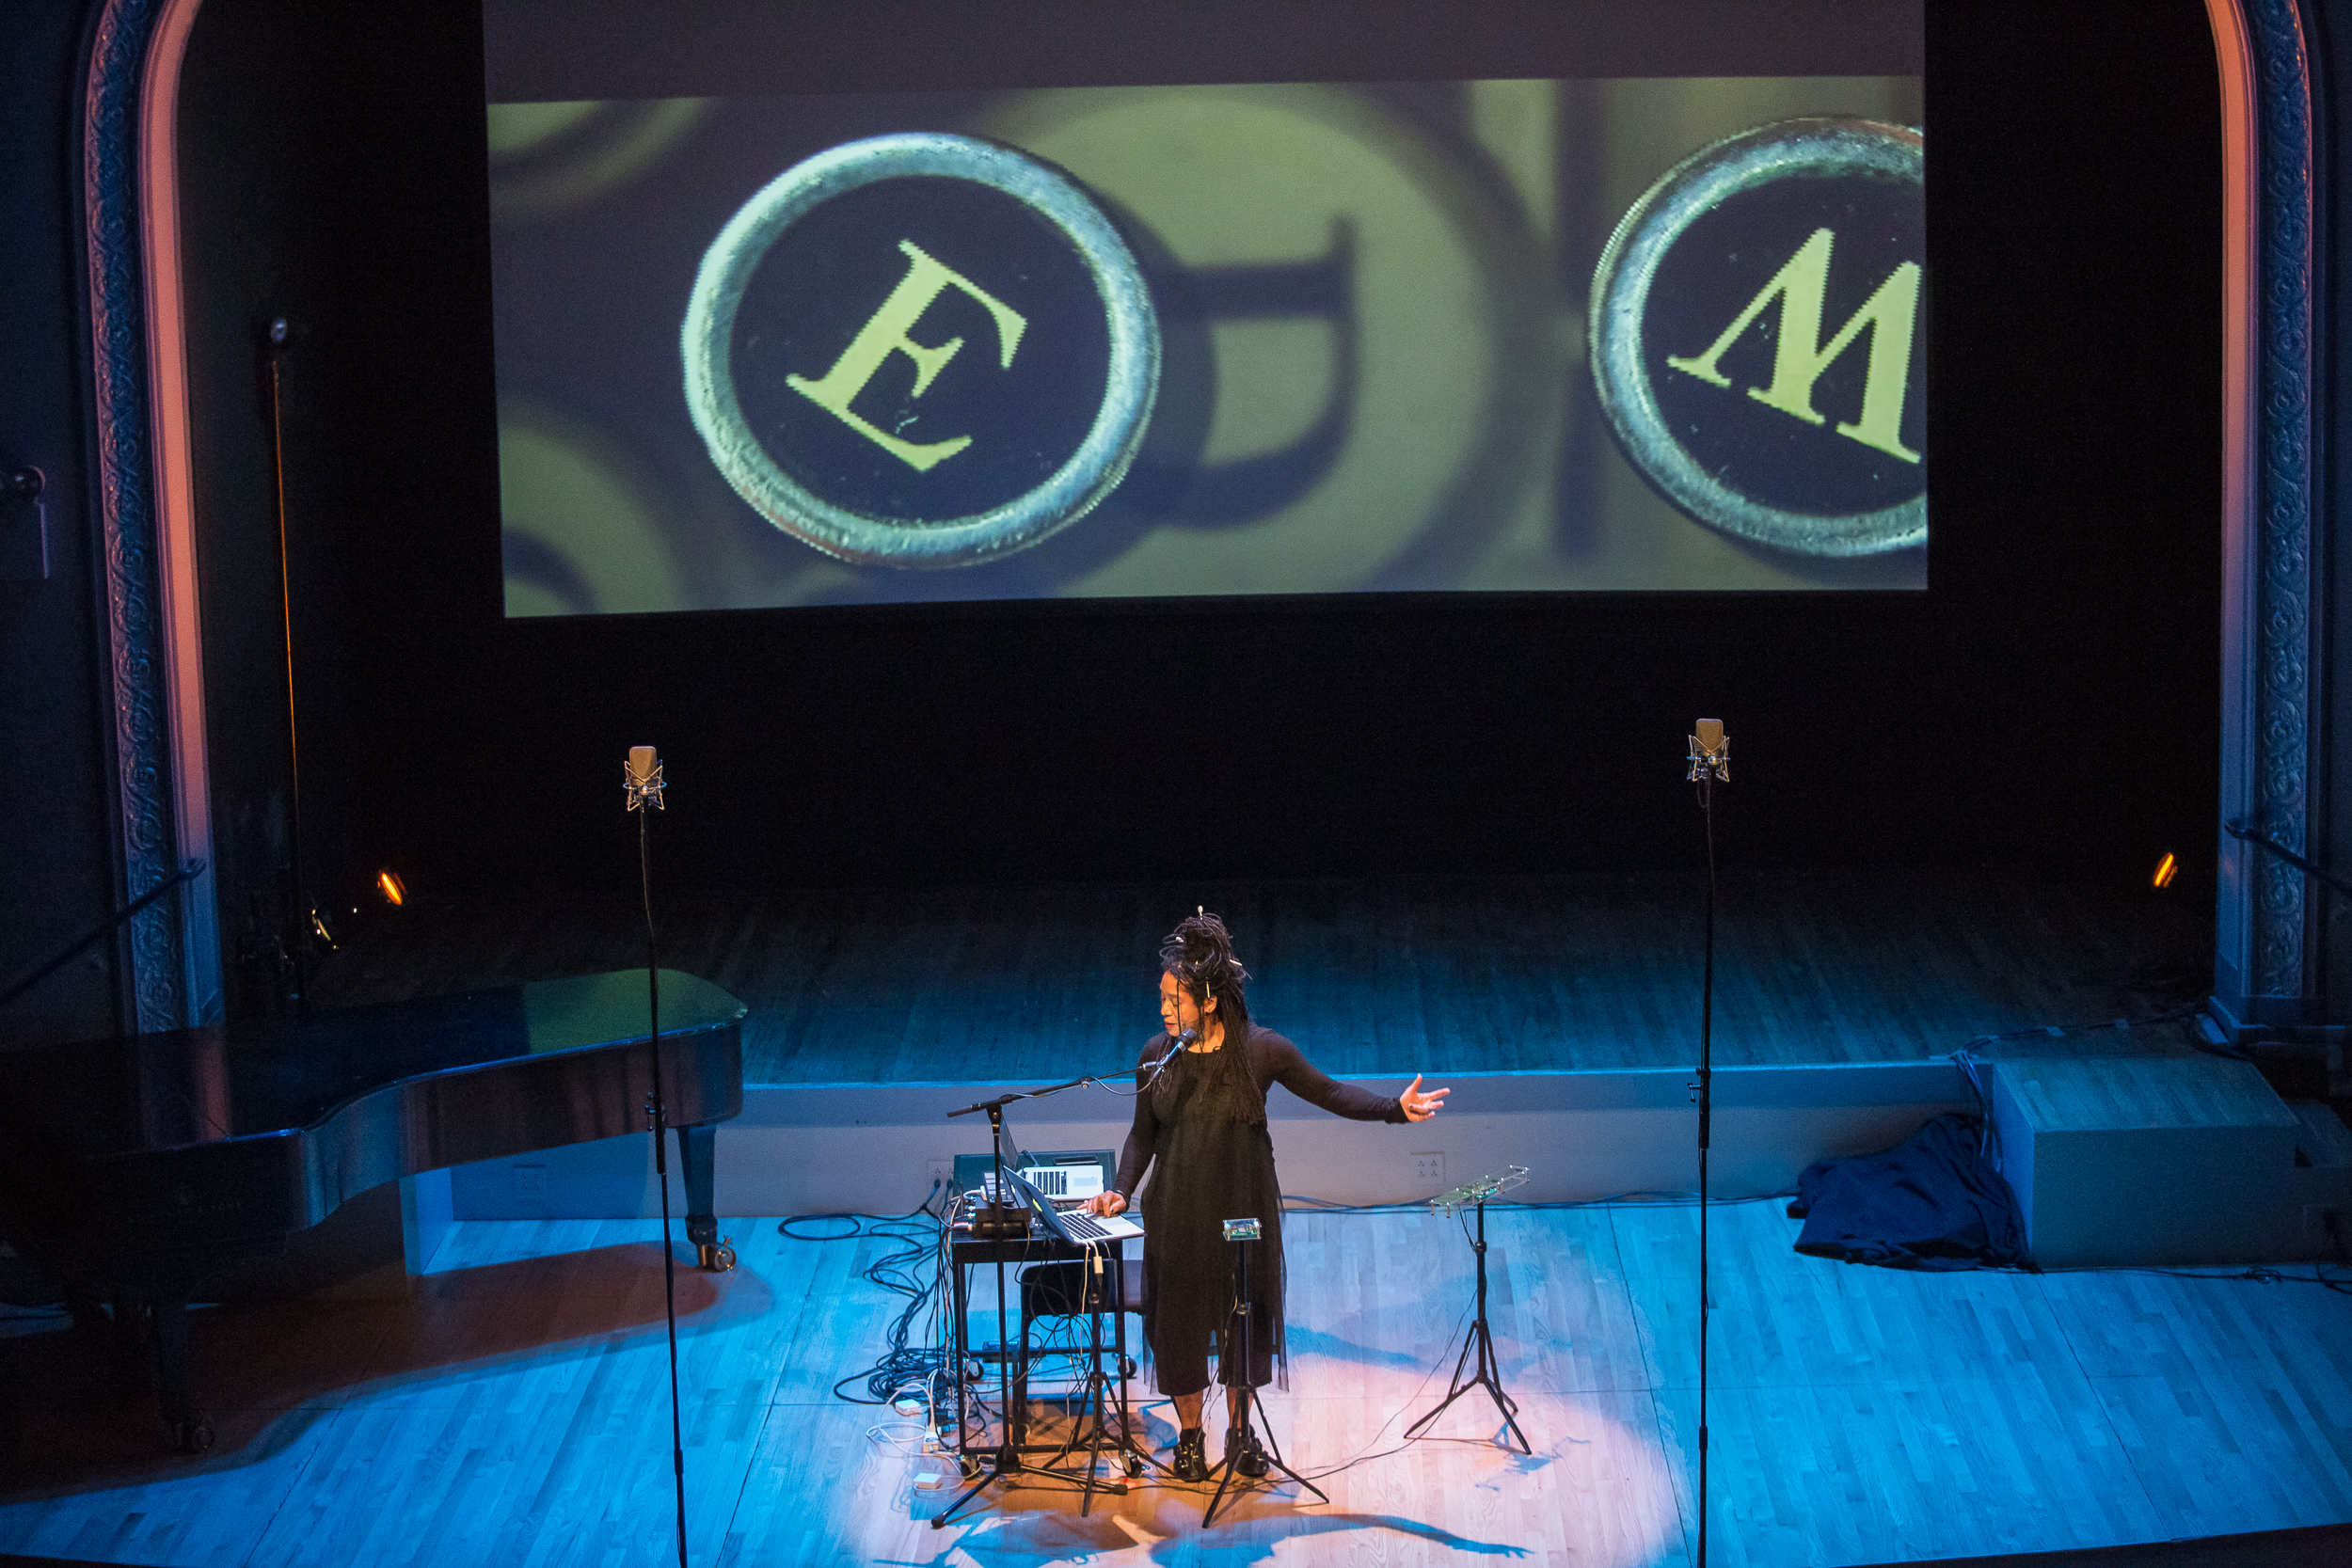 Pamela Z performing on two laptops with a microphone and various sensors standing on stage in front of a film projection of various letters in different directions.